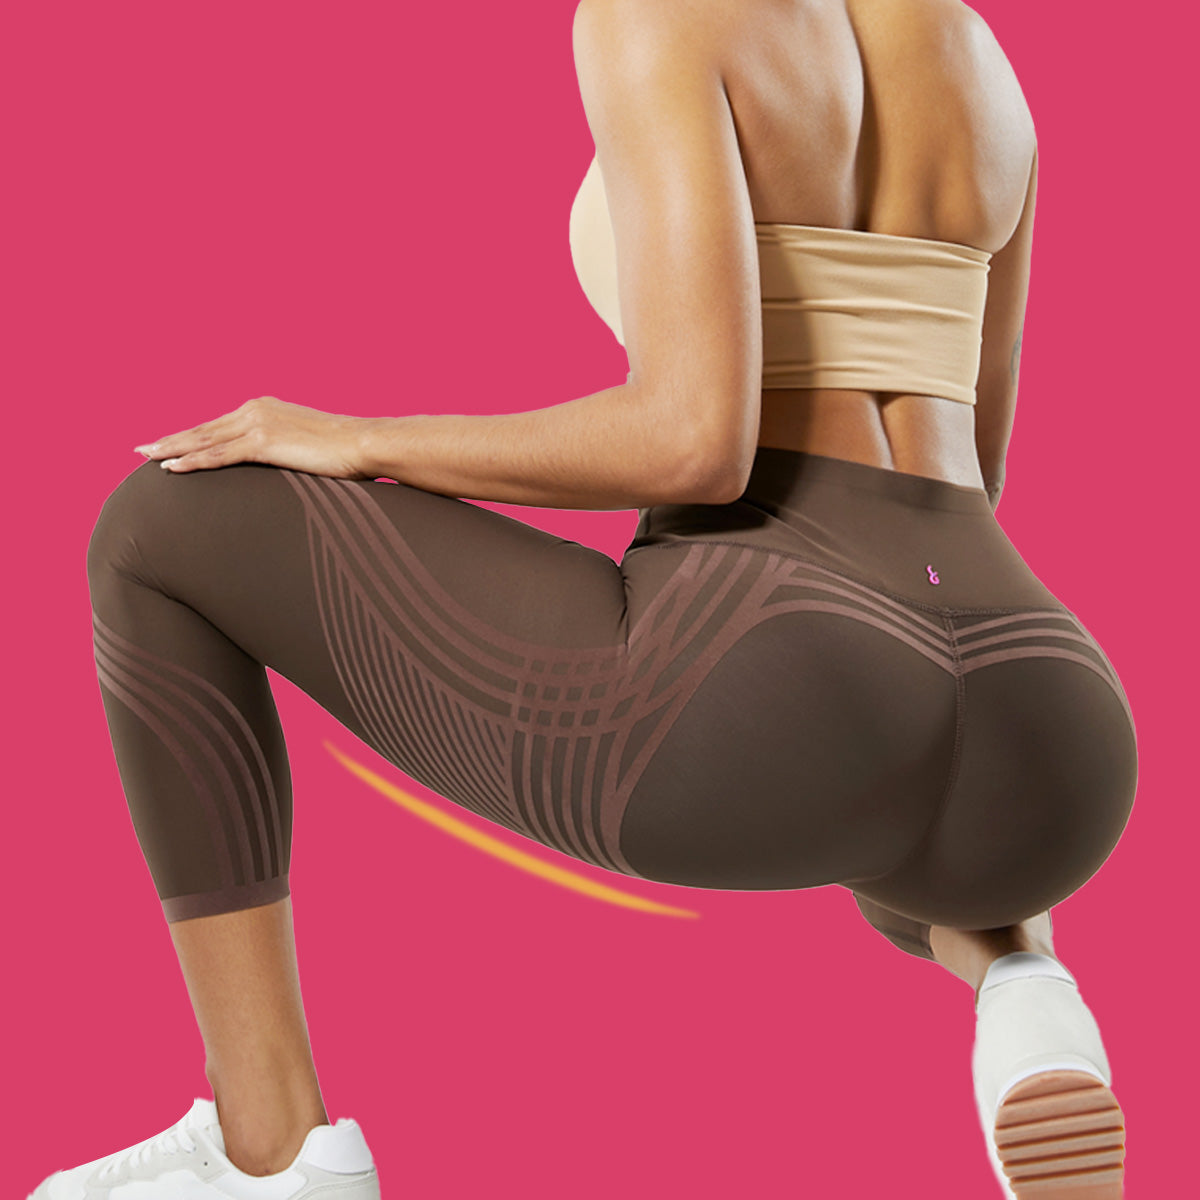 WomanHealthBlogs-These Body Sculpting Leggings Designed For Thick